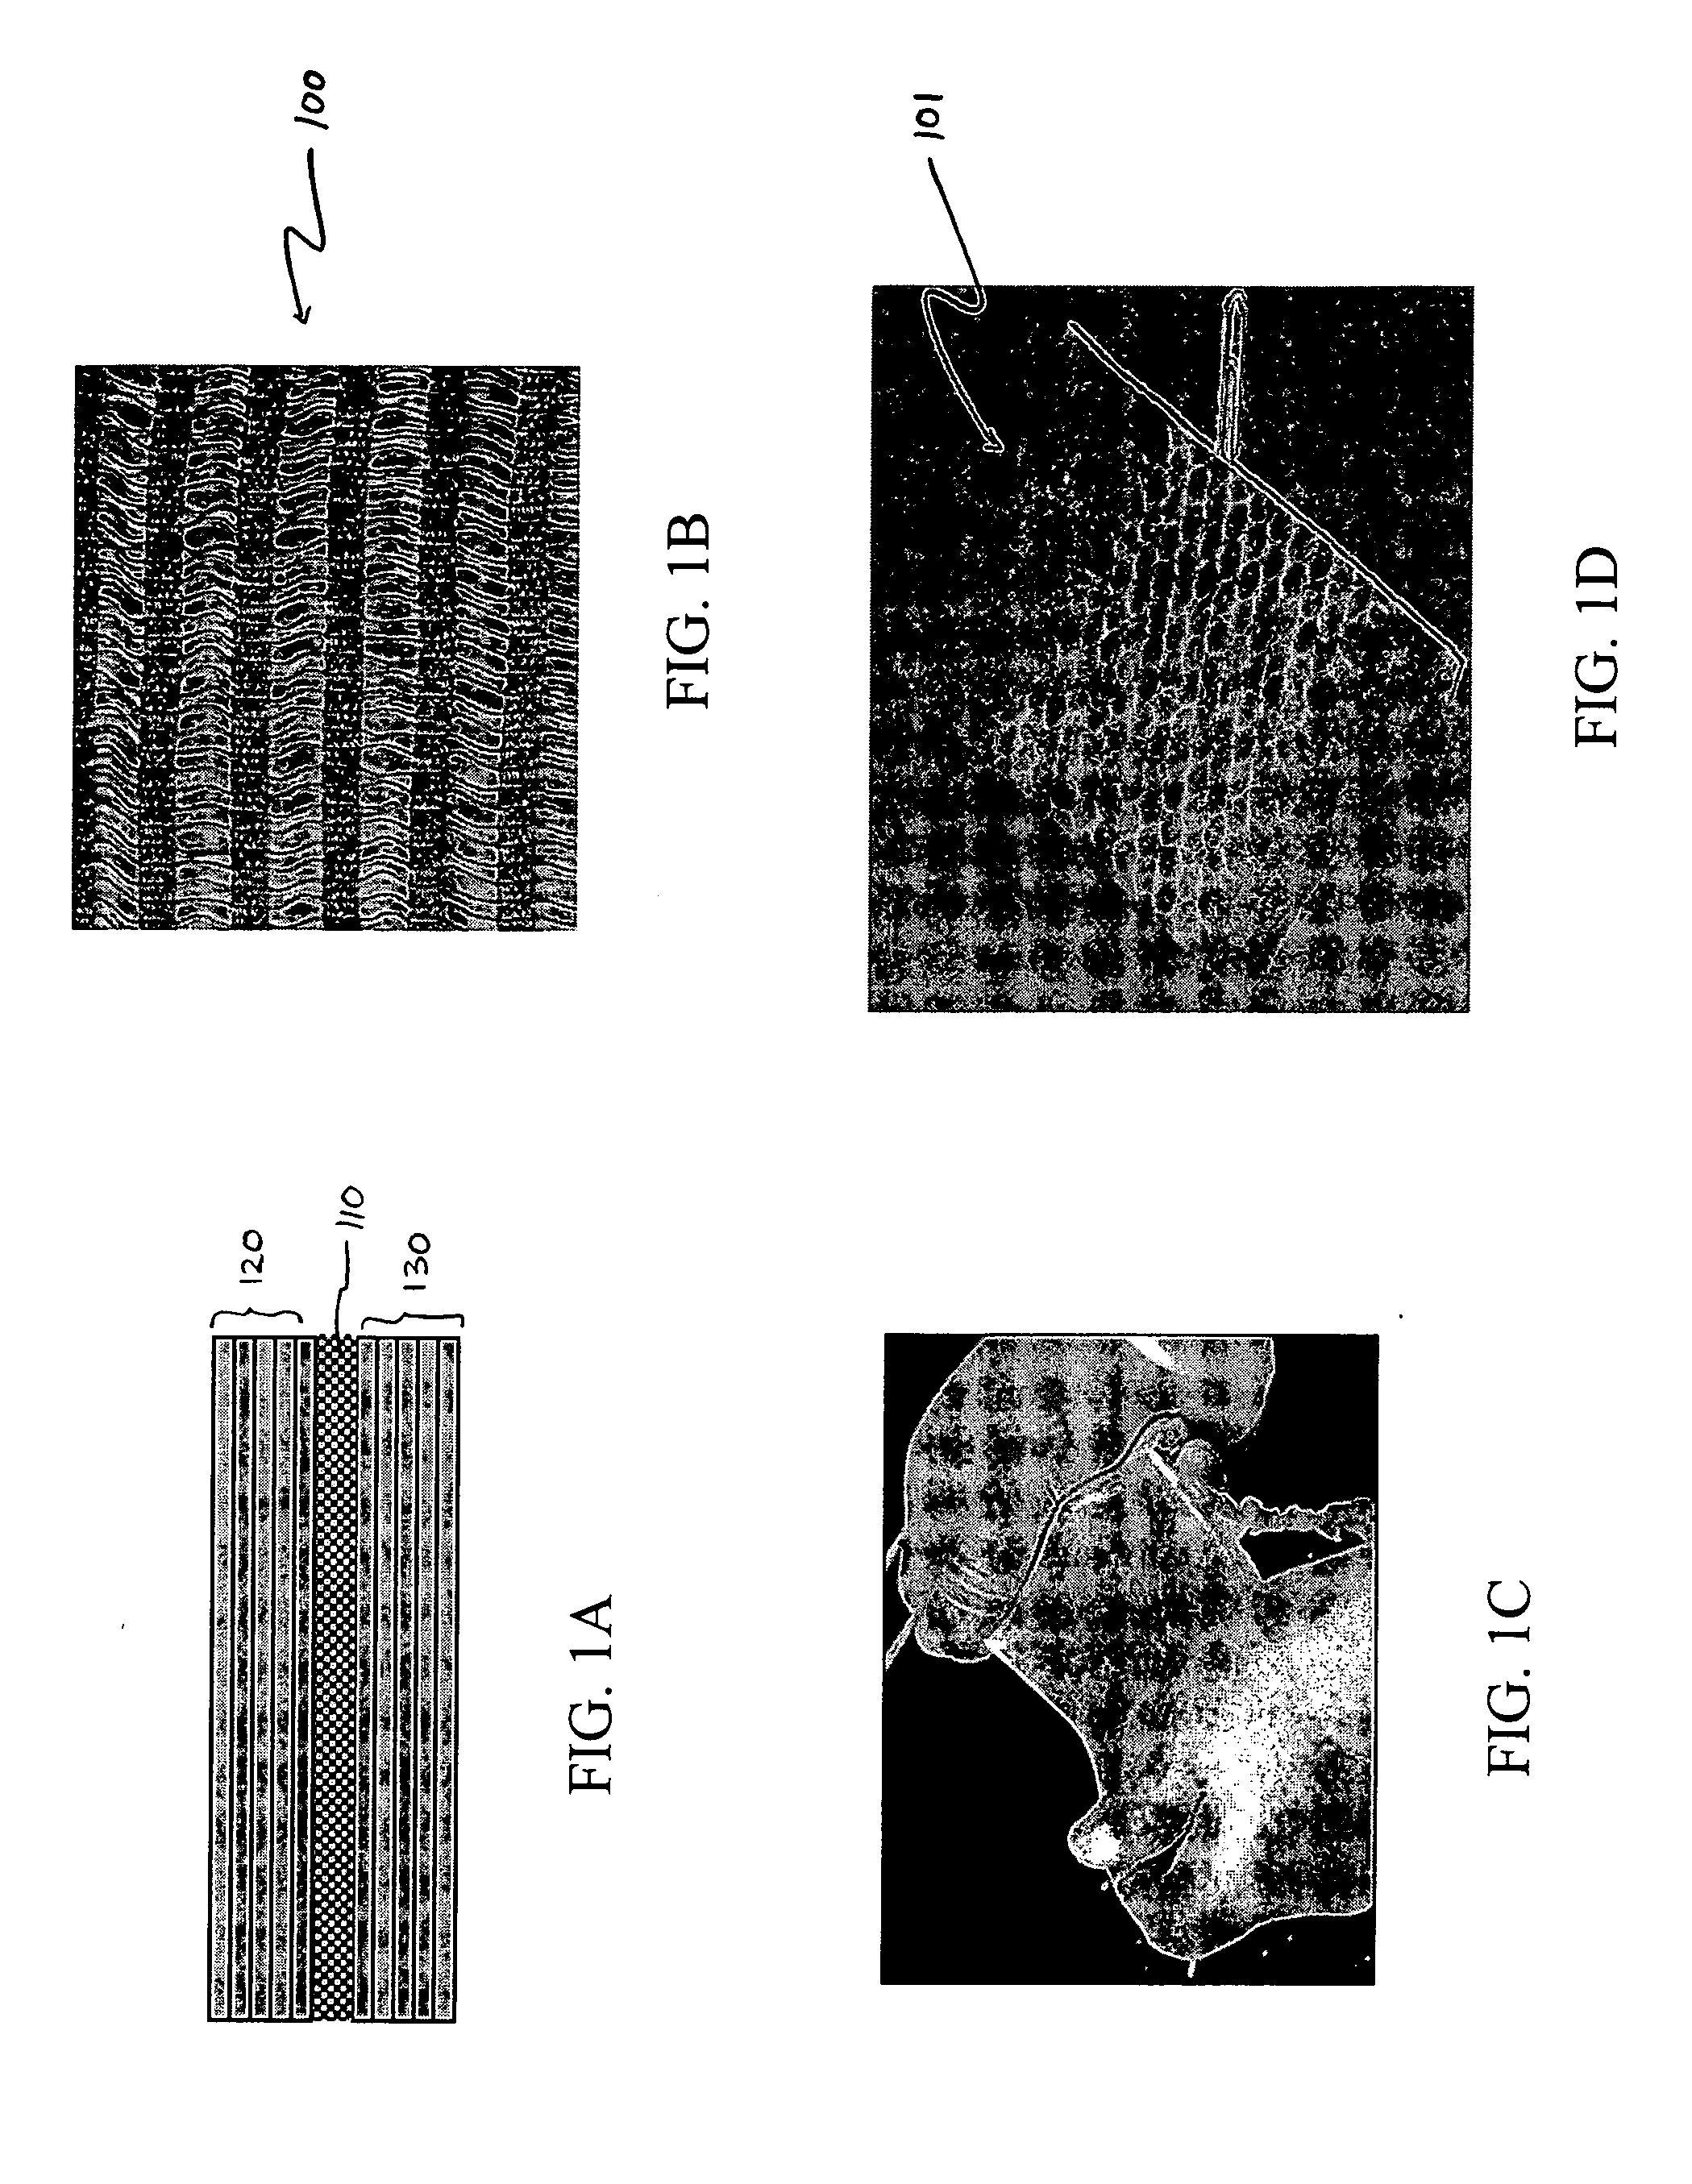 Devices for intervertebral augmentation and methods of controlling their delivery